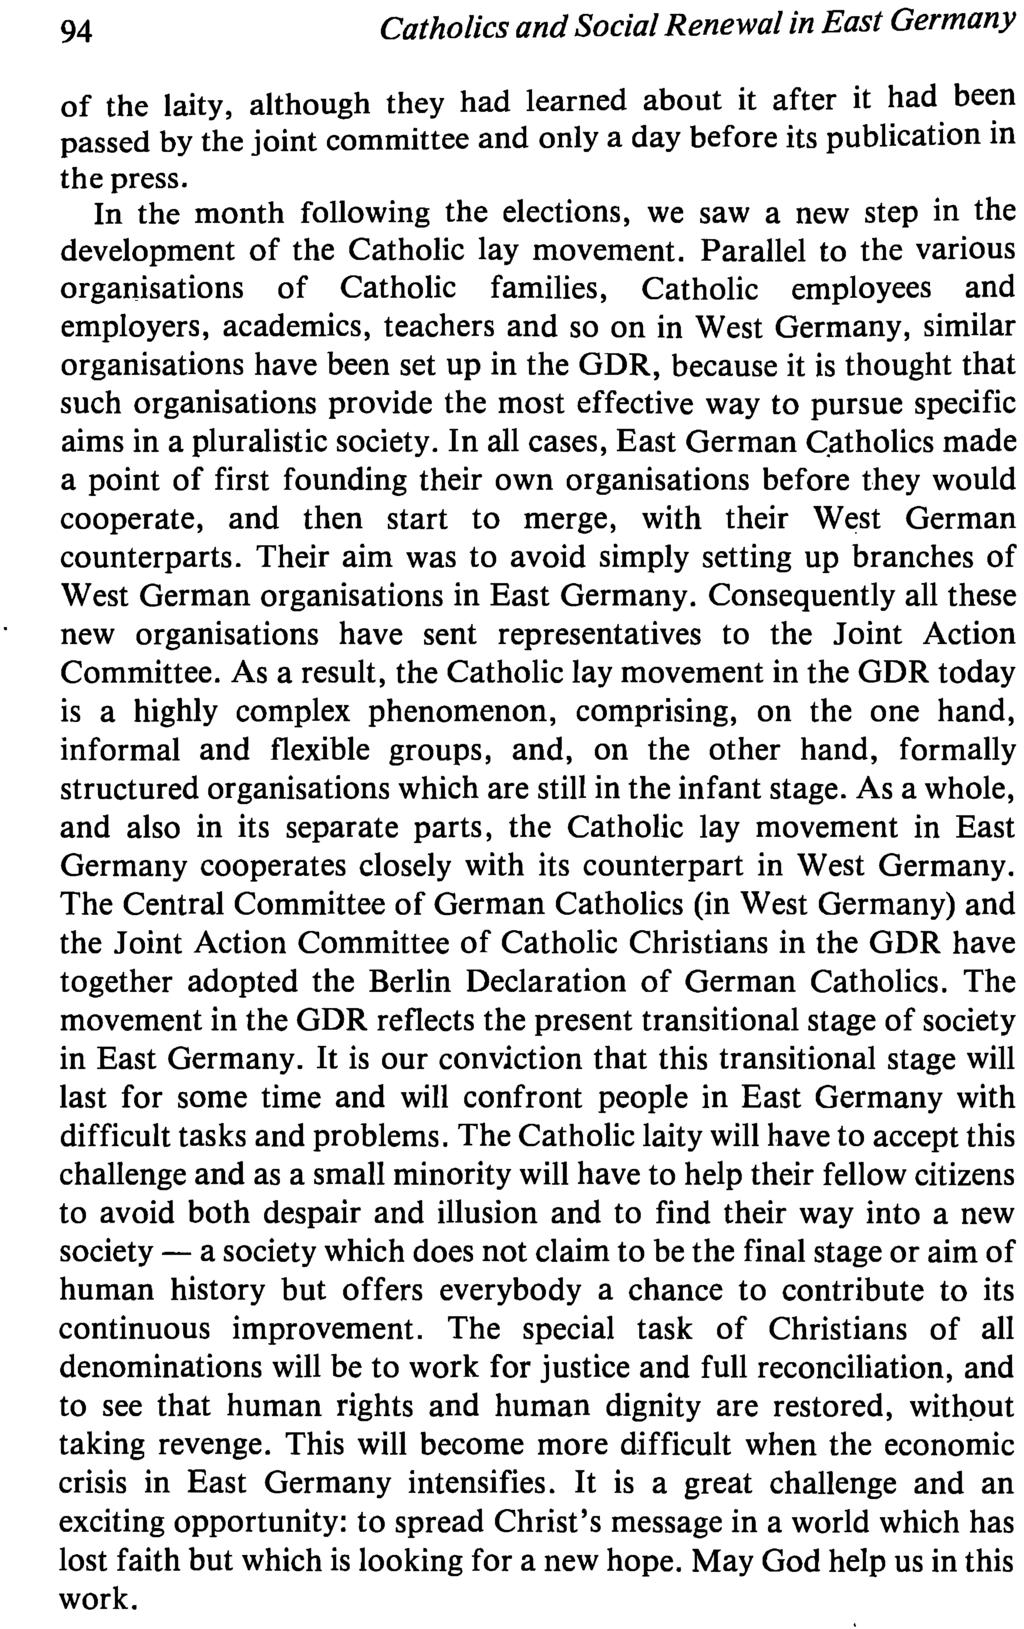 94 Catholics and Social Renewal in East Germany of the laity, although they had learned about it after it had been passed by the joint committee and only a day before its publication in the press.